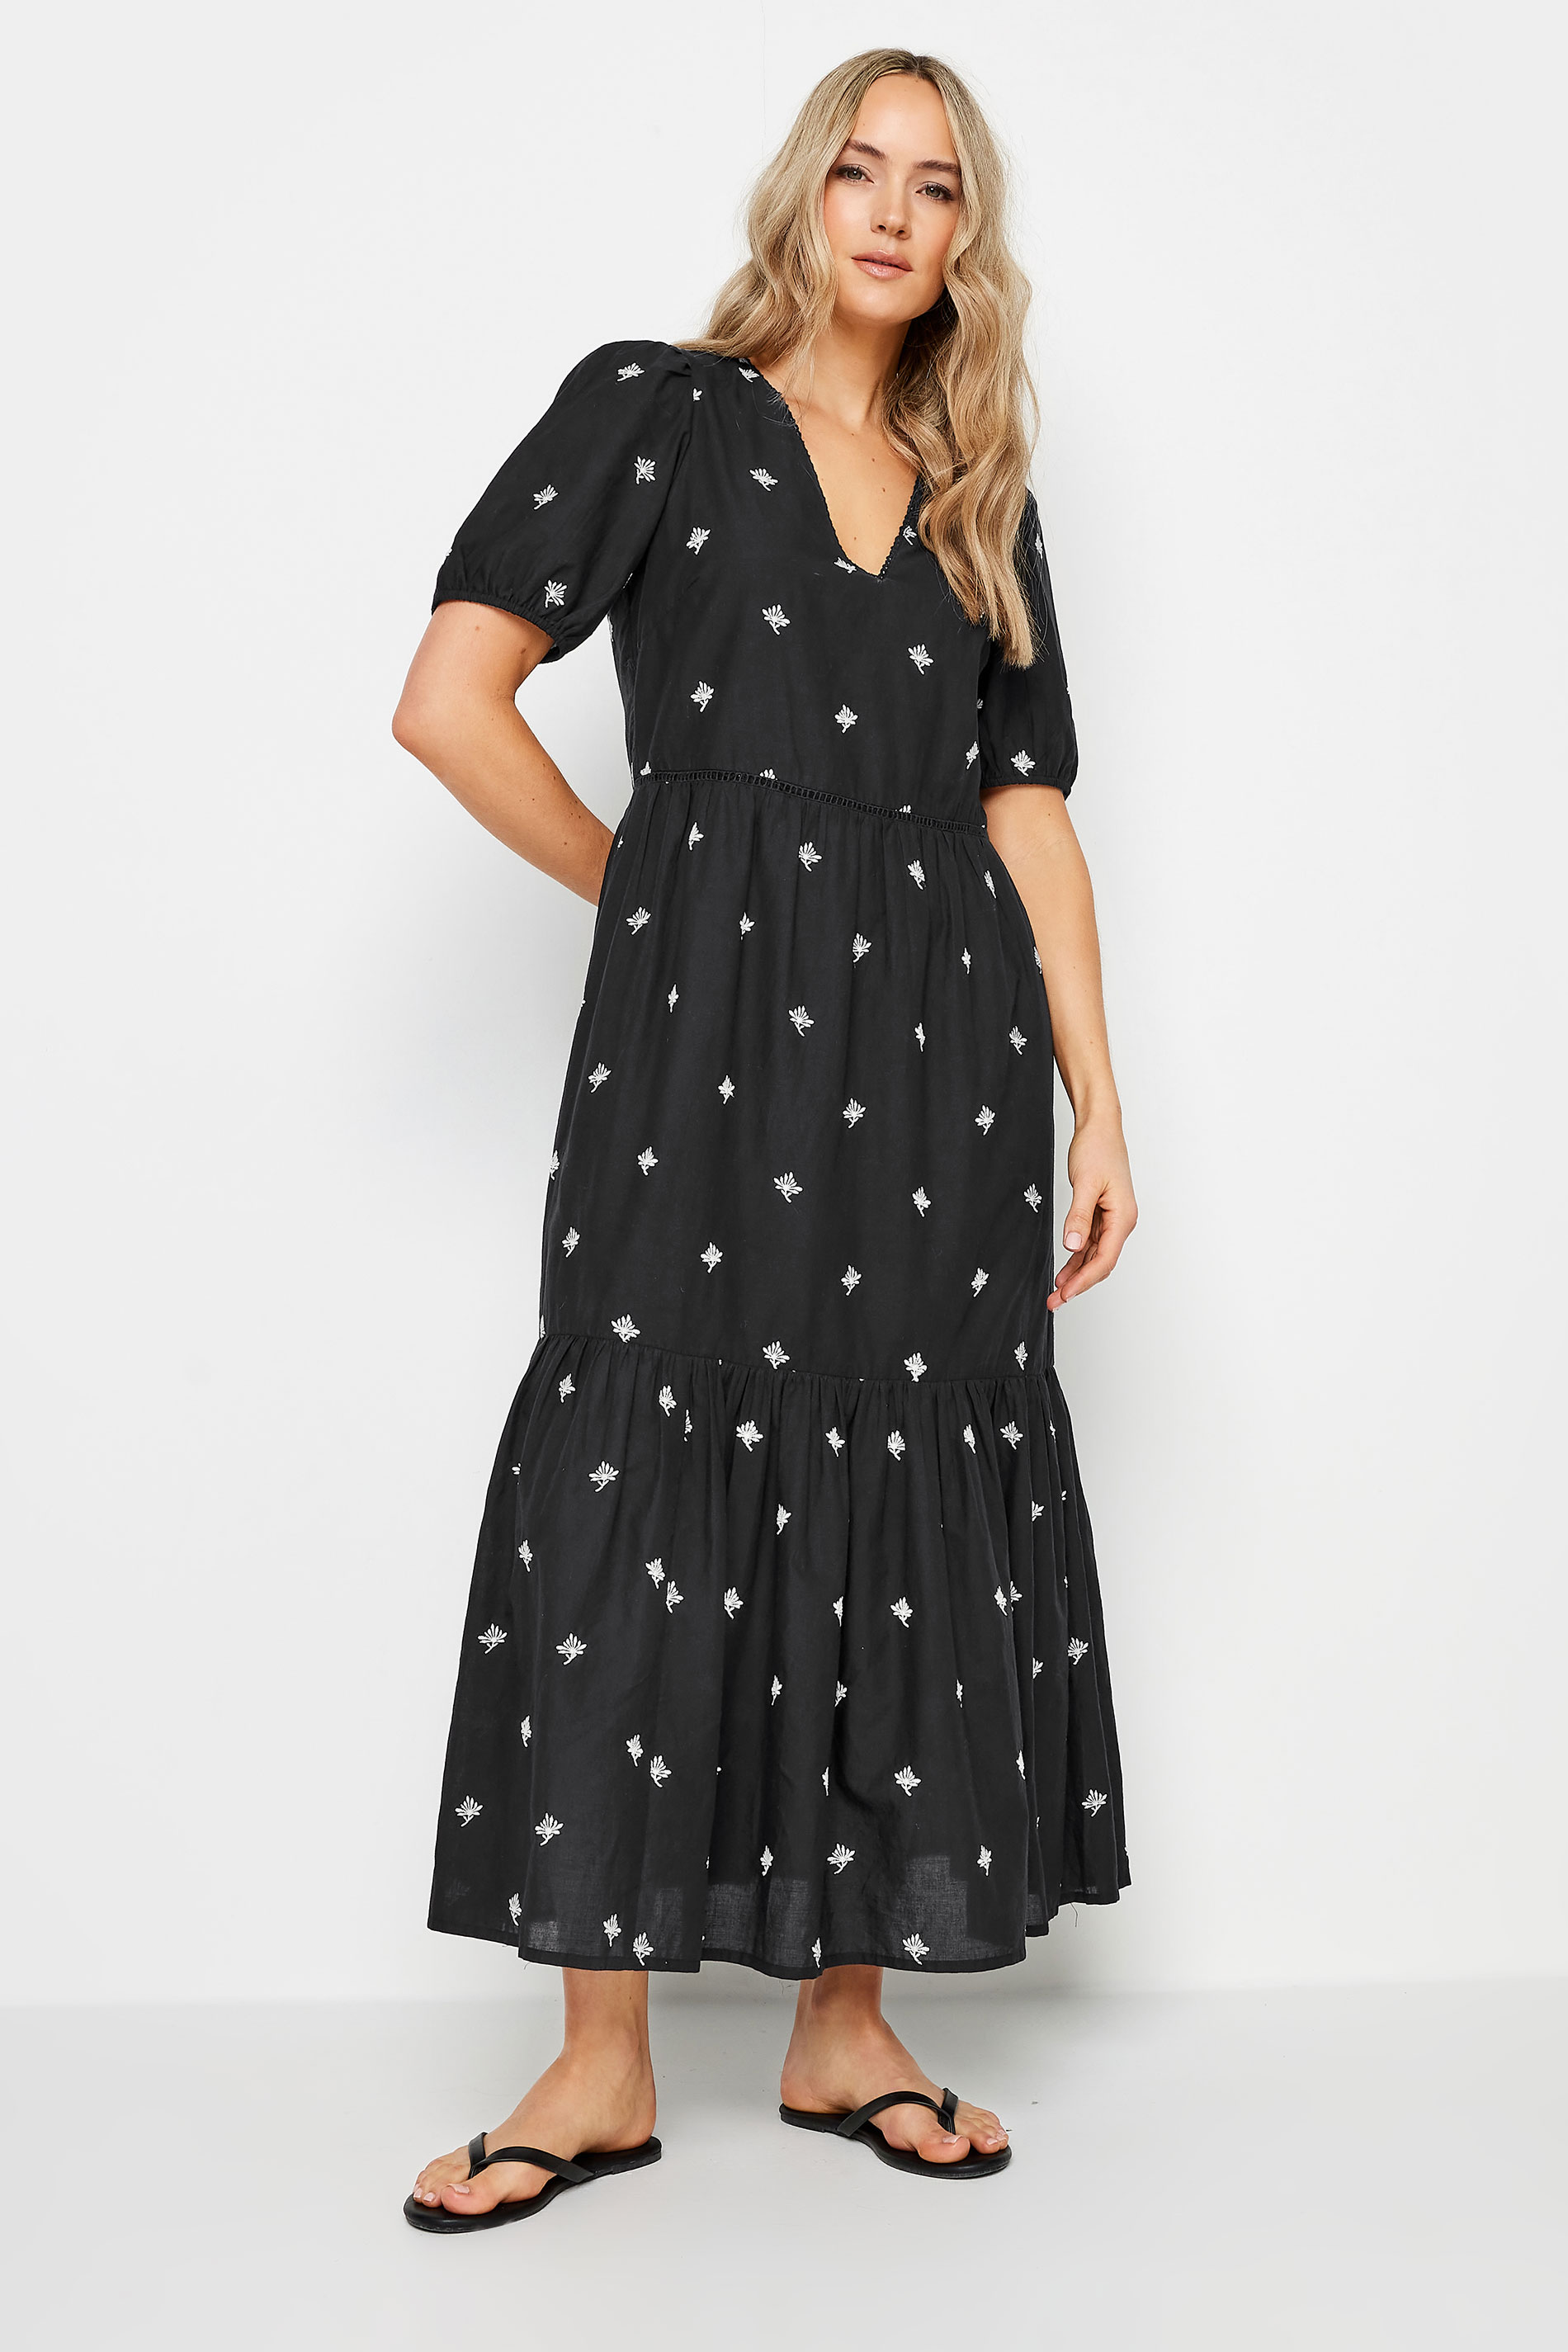 LTS Tall Women's Black Embroidered Tiered Maxi Dress | Long Tall Sally 3